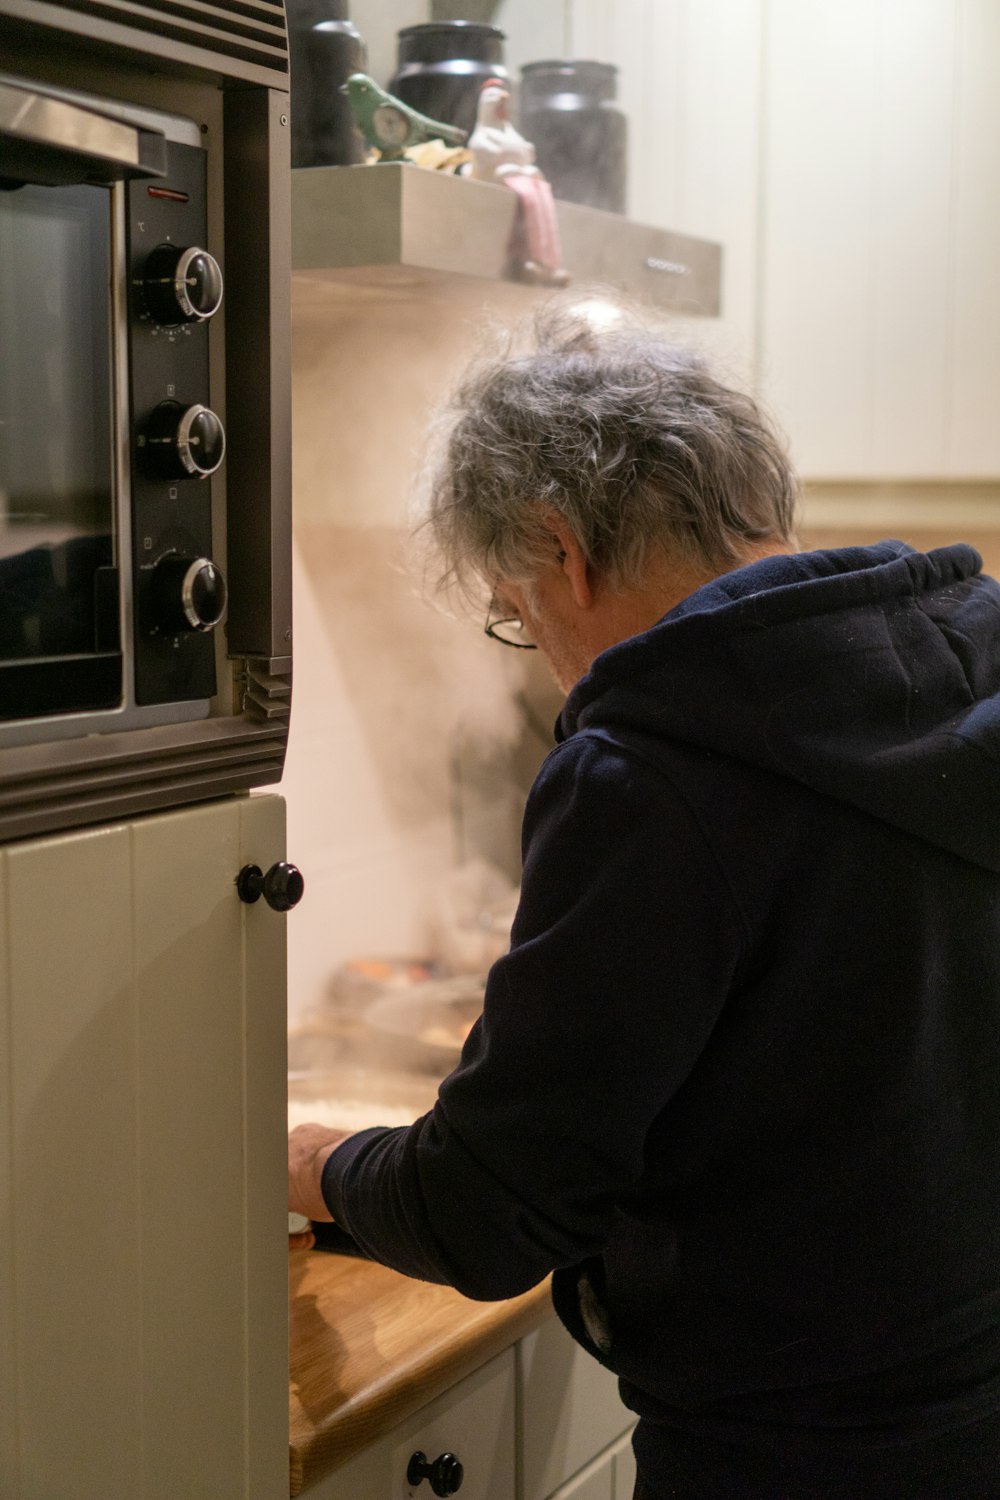 a person standing in front of a microwave oven